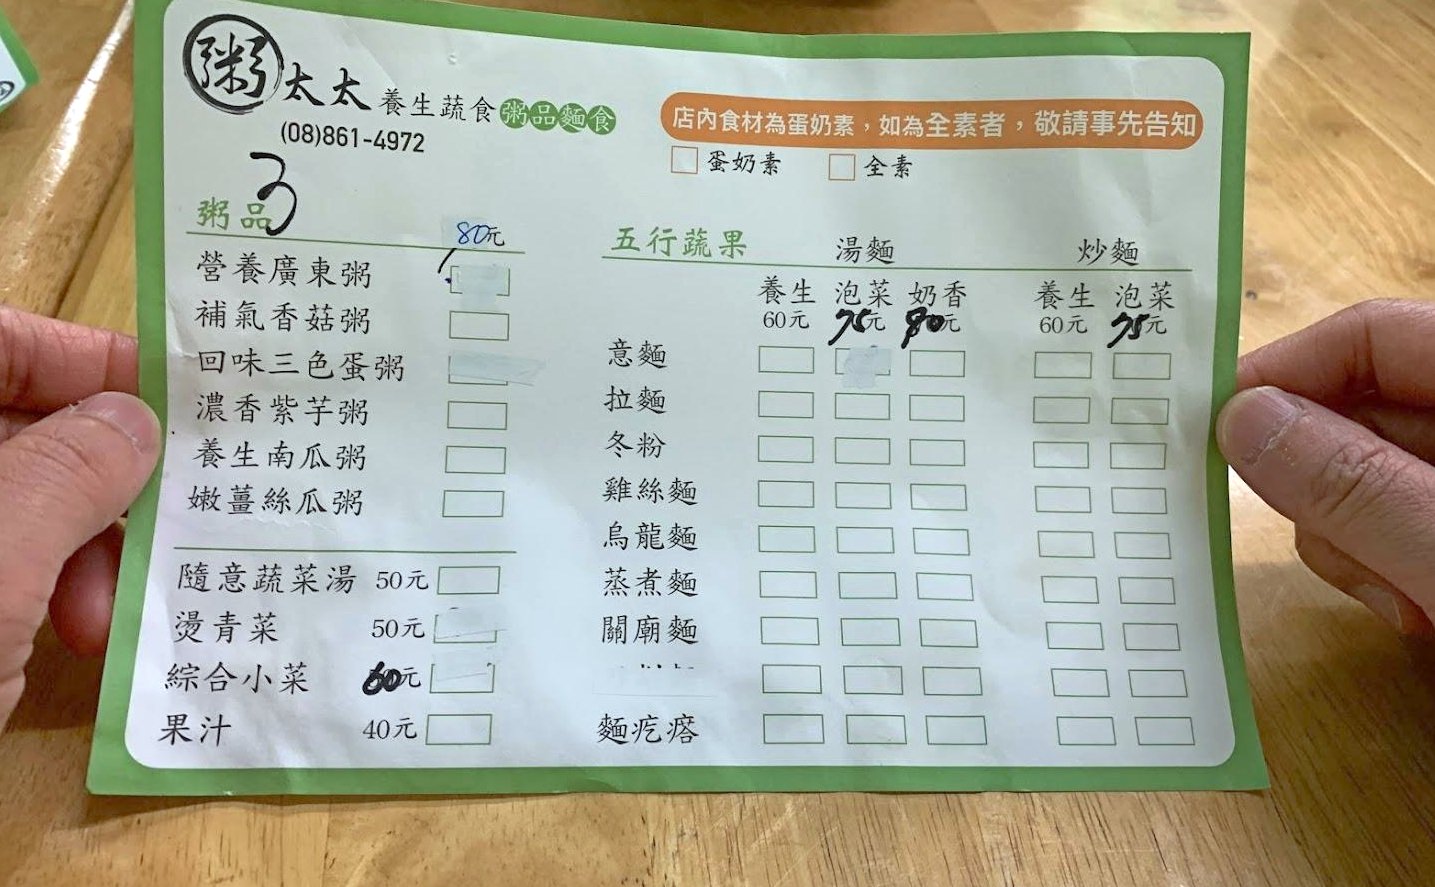 Menu in traditional Chinese